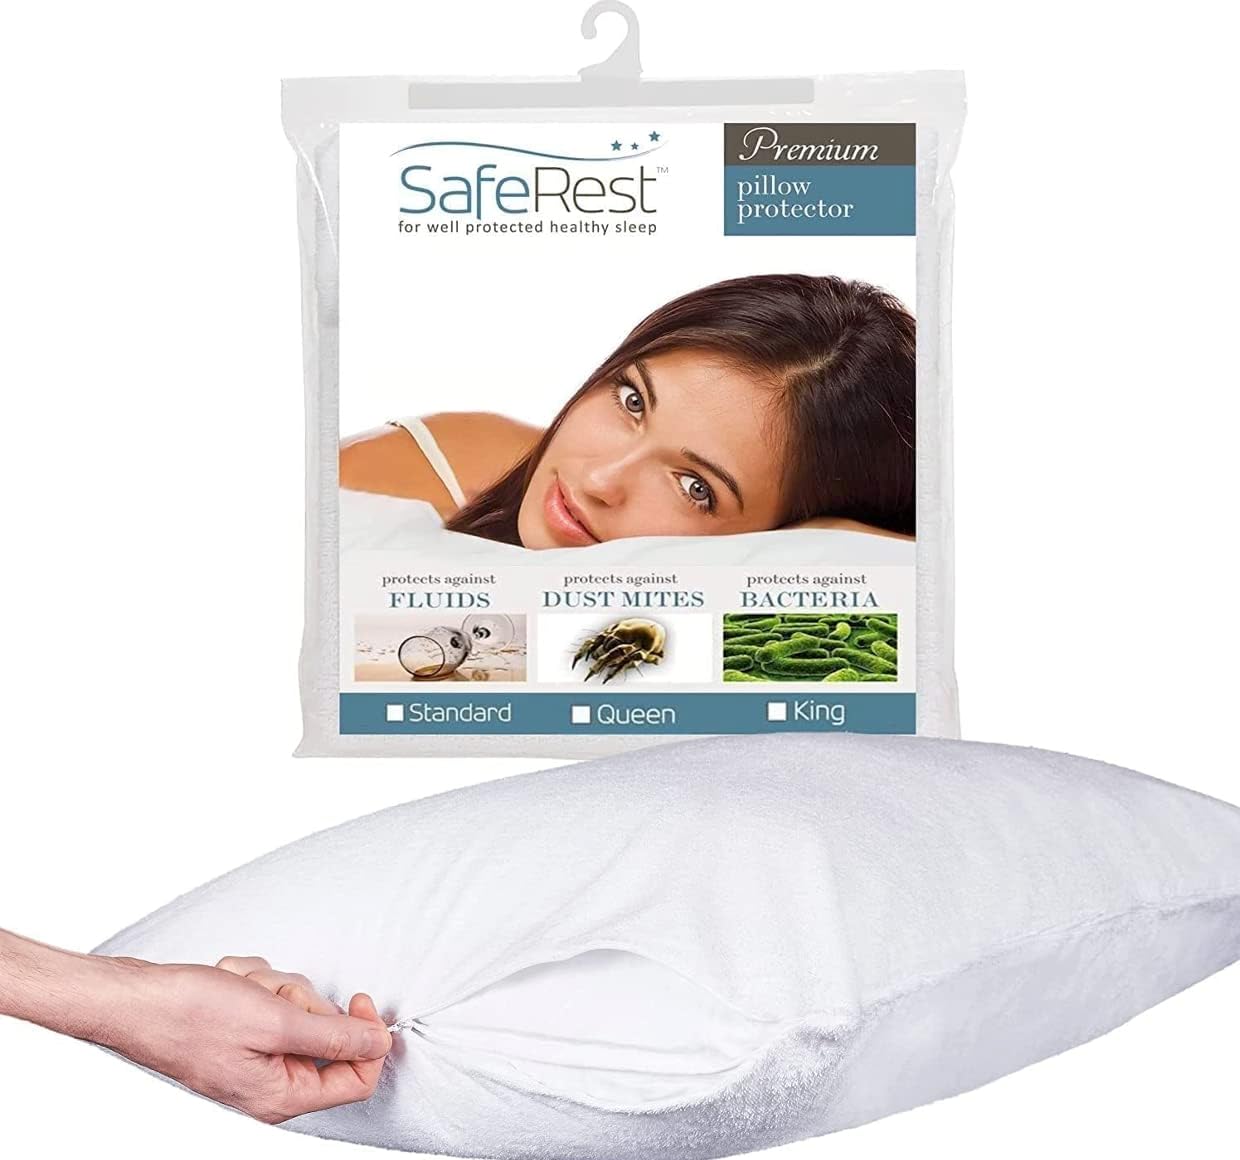 pillow protector product package